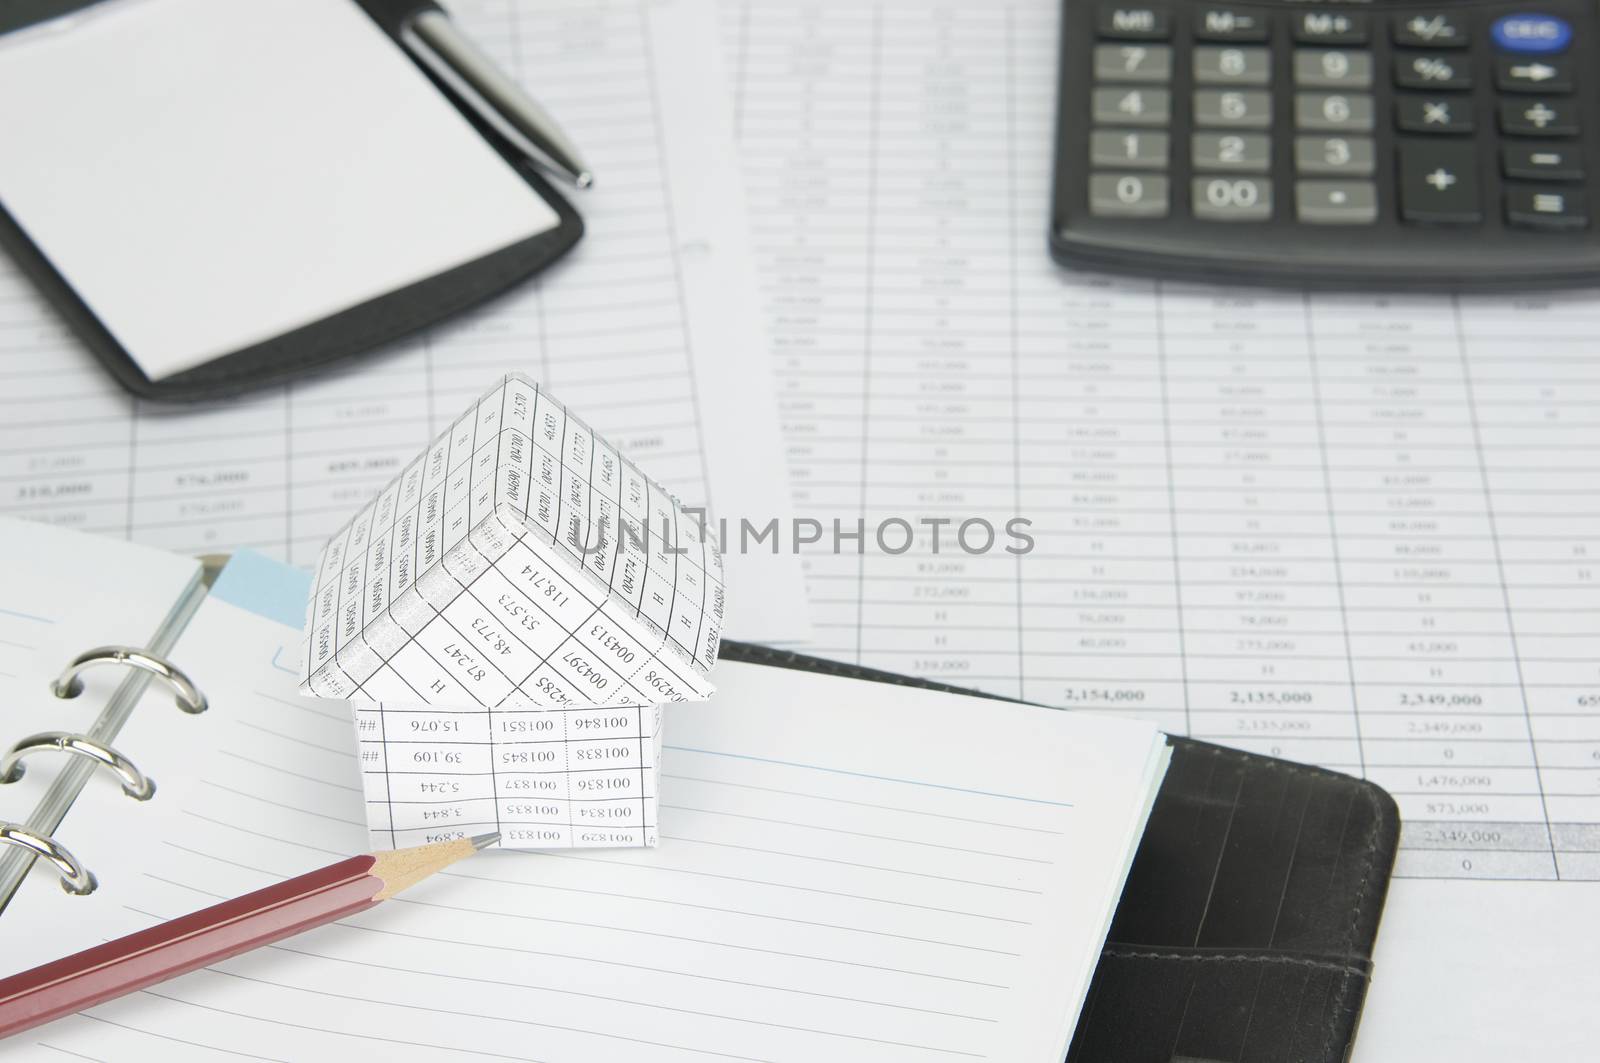 House and pencil on notebook  have blur calculator and notepad with pen on finance account as background.